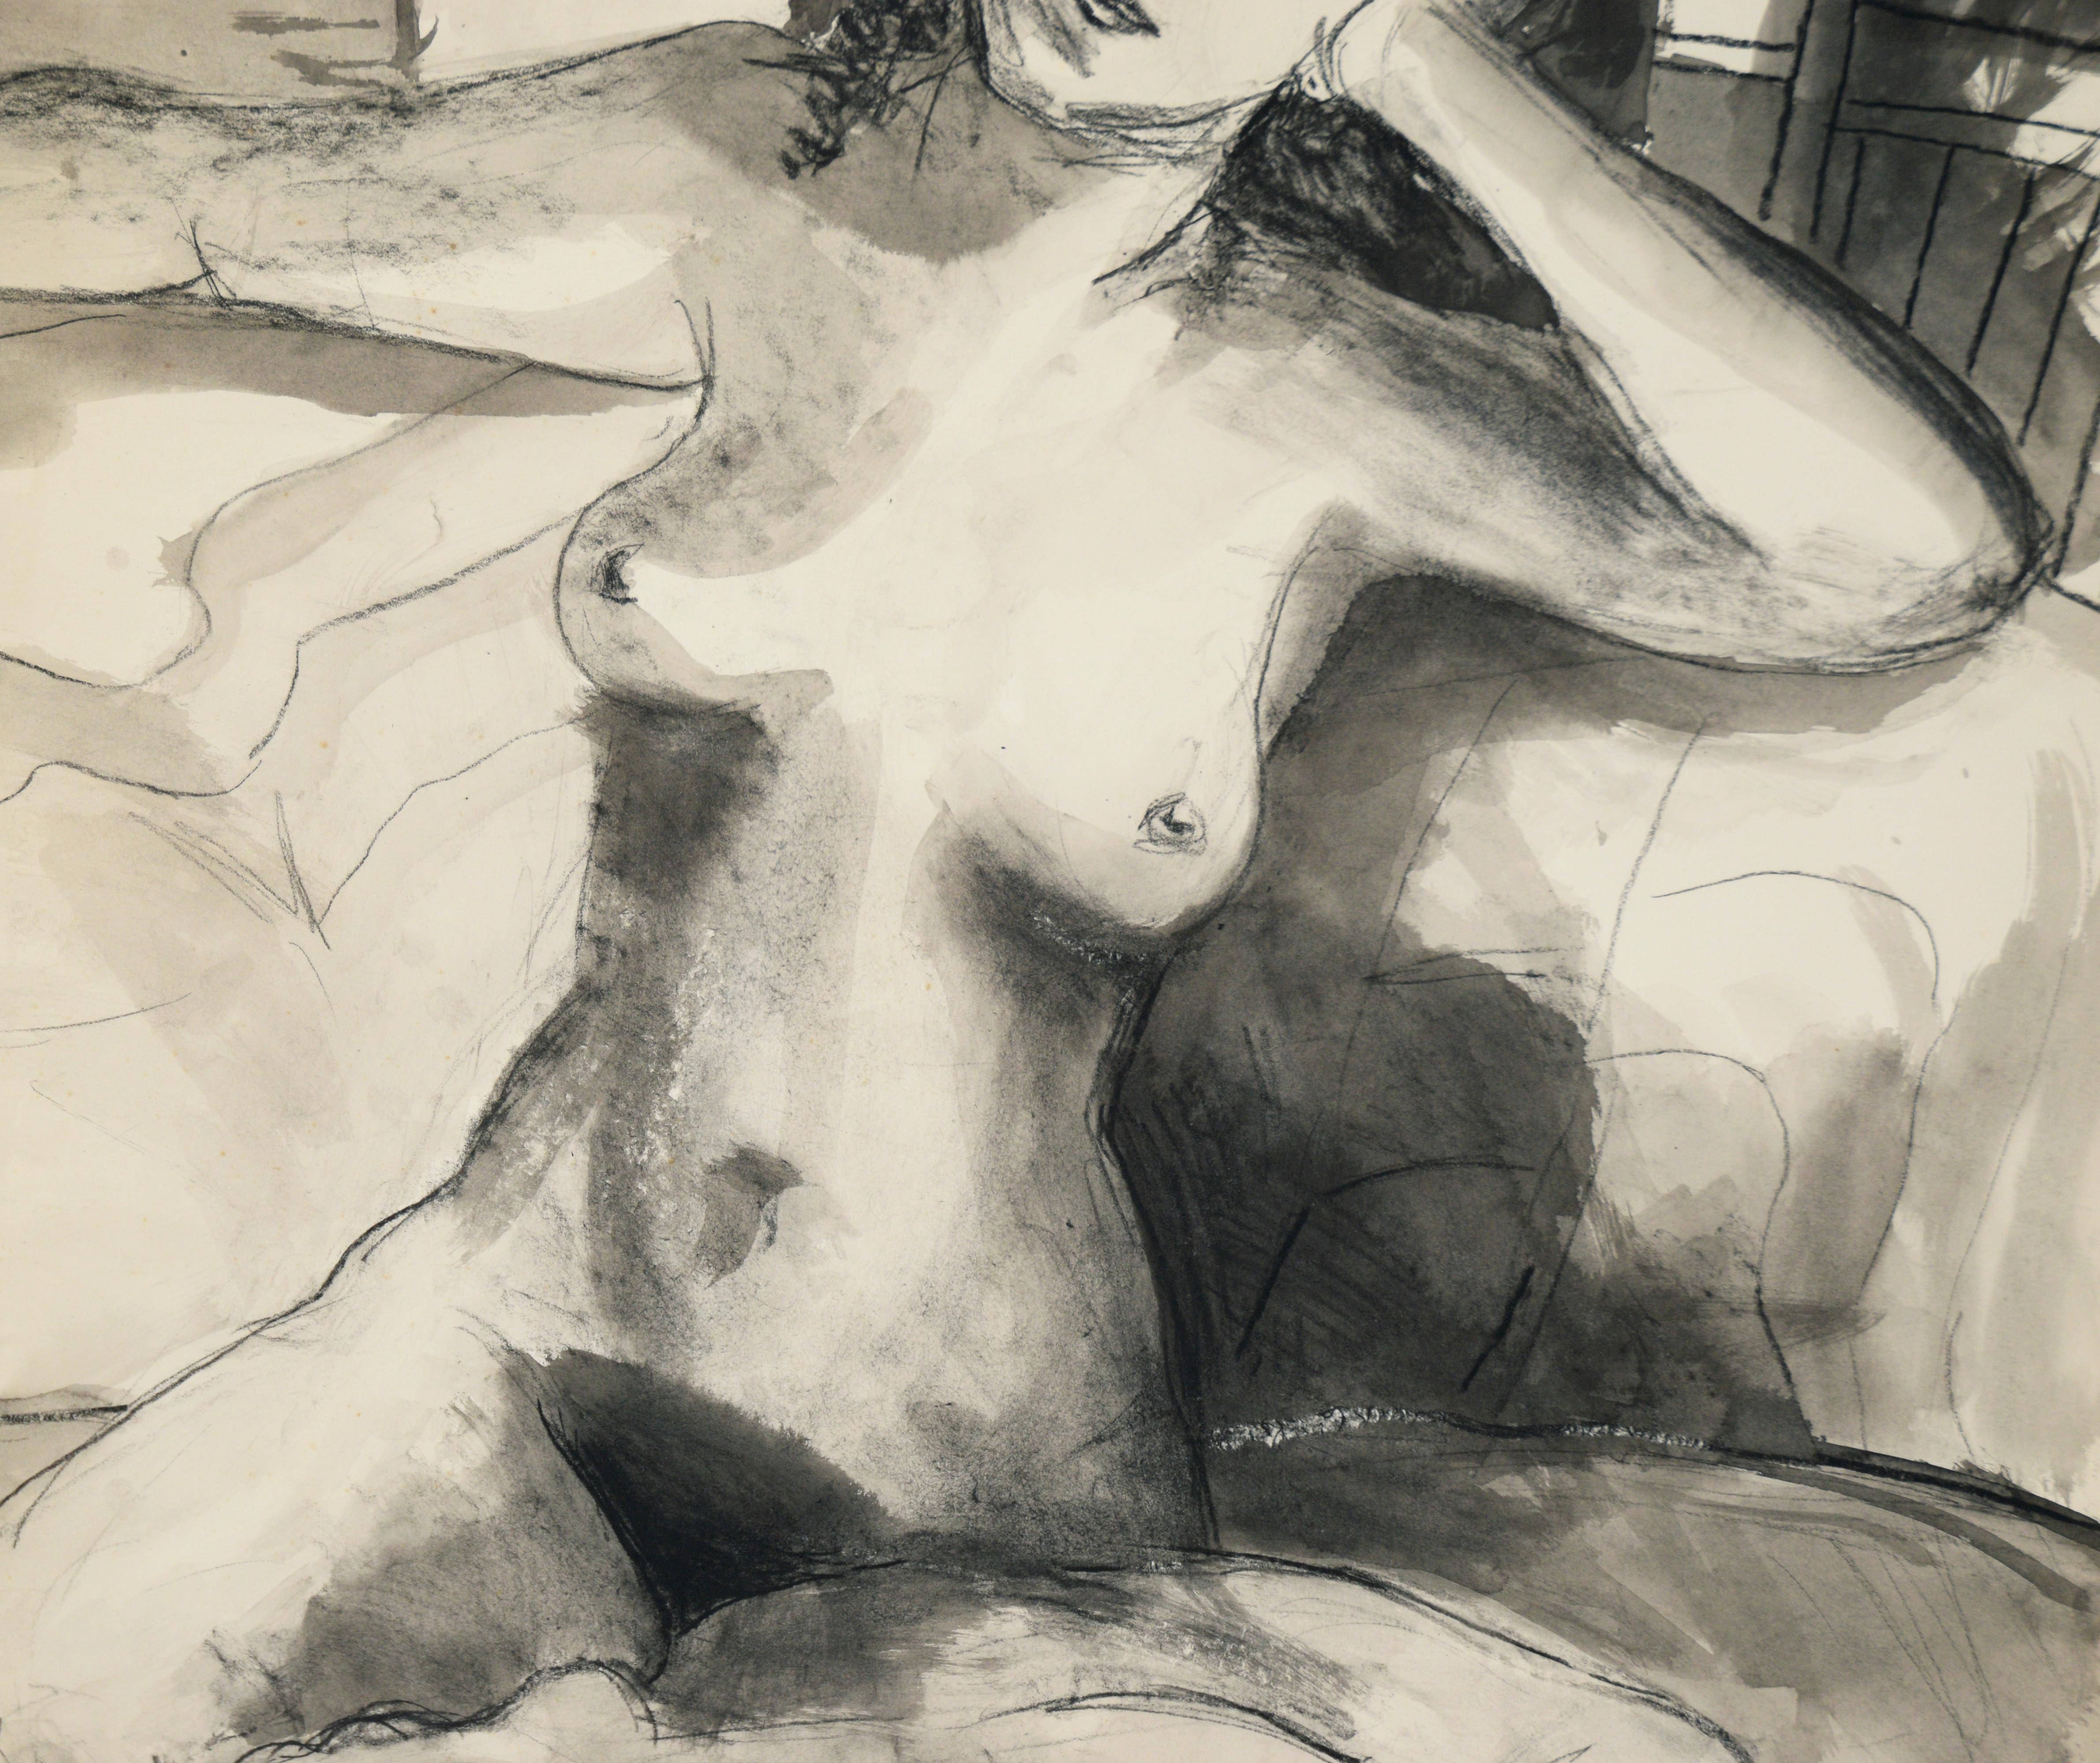 Figurative Nude Study - Watercolor and Charcoal on Paper - Abstract Expressionist Painting by Katherine Kallick